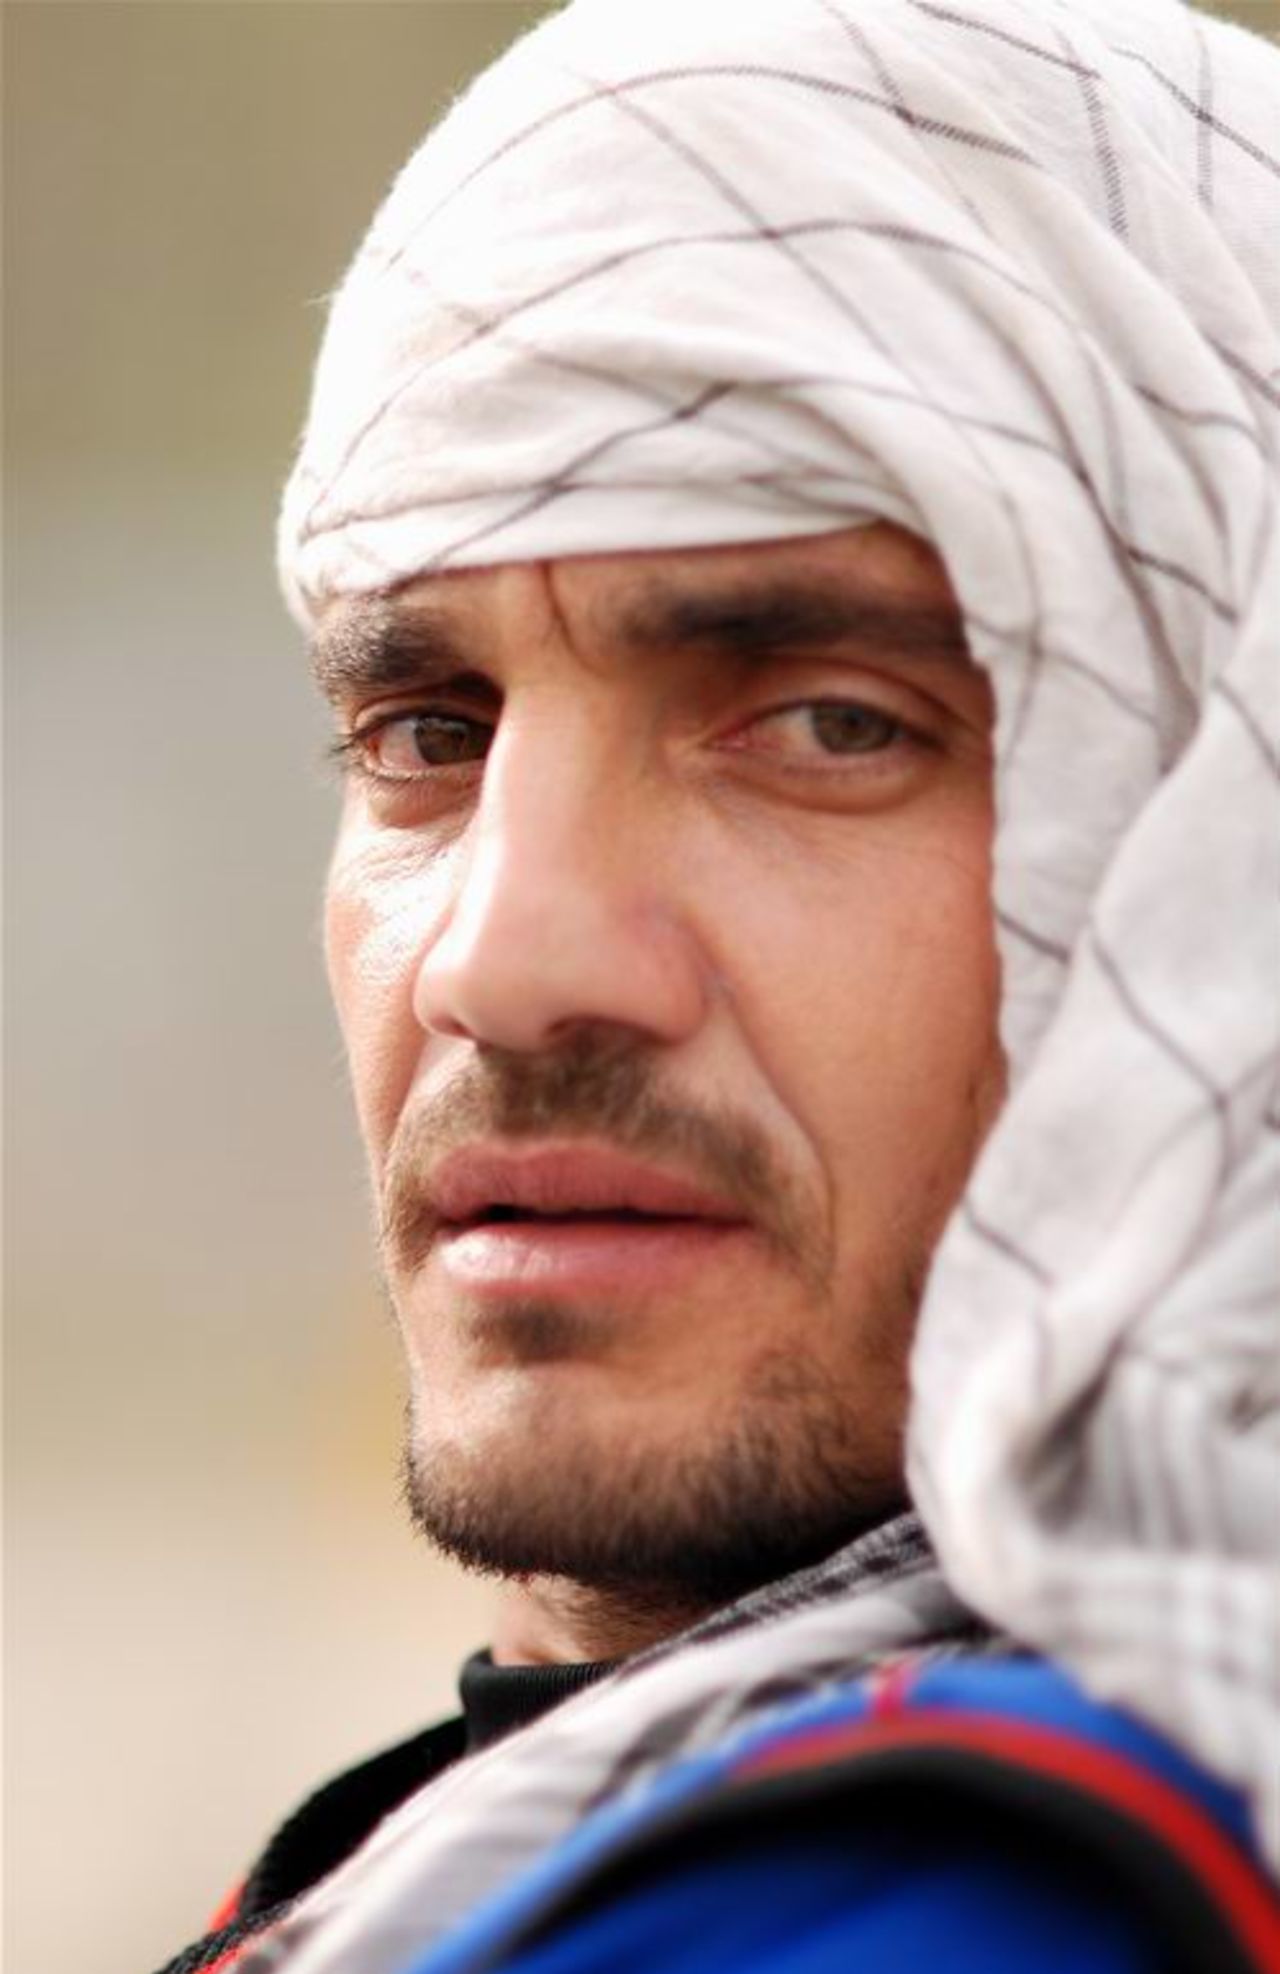 Close-up of Raees Ahmadzai of Afghanistan, April 2009